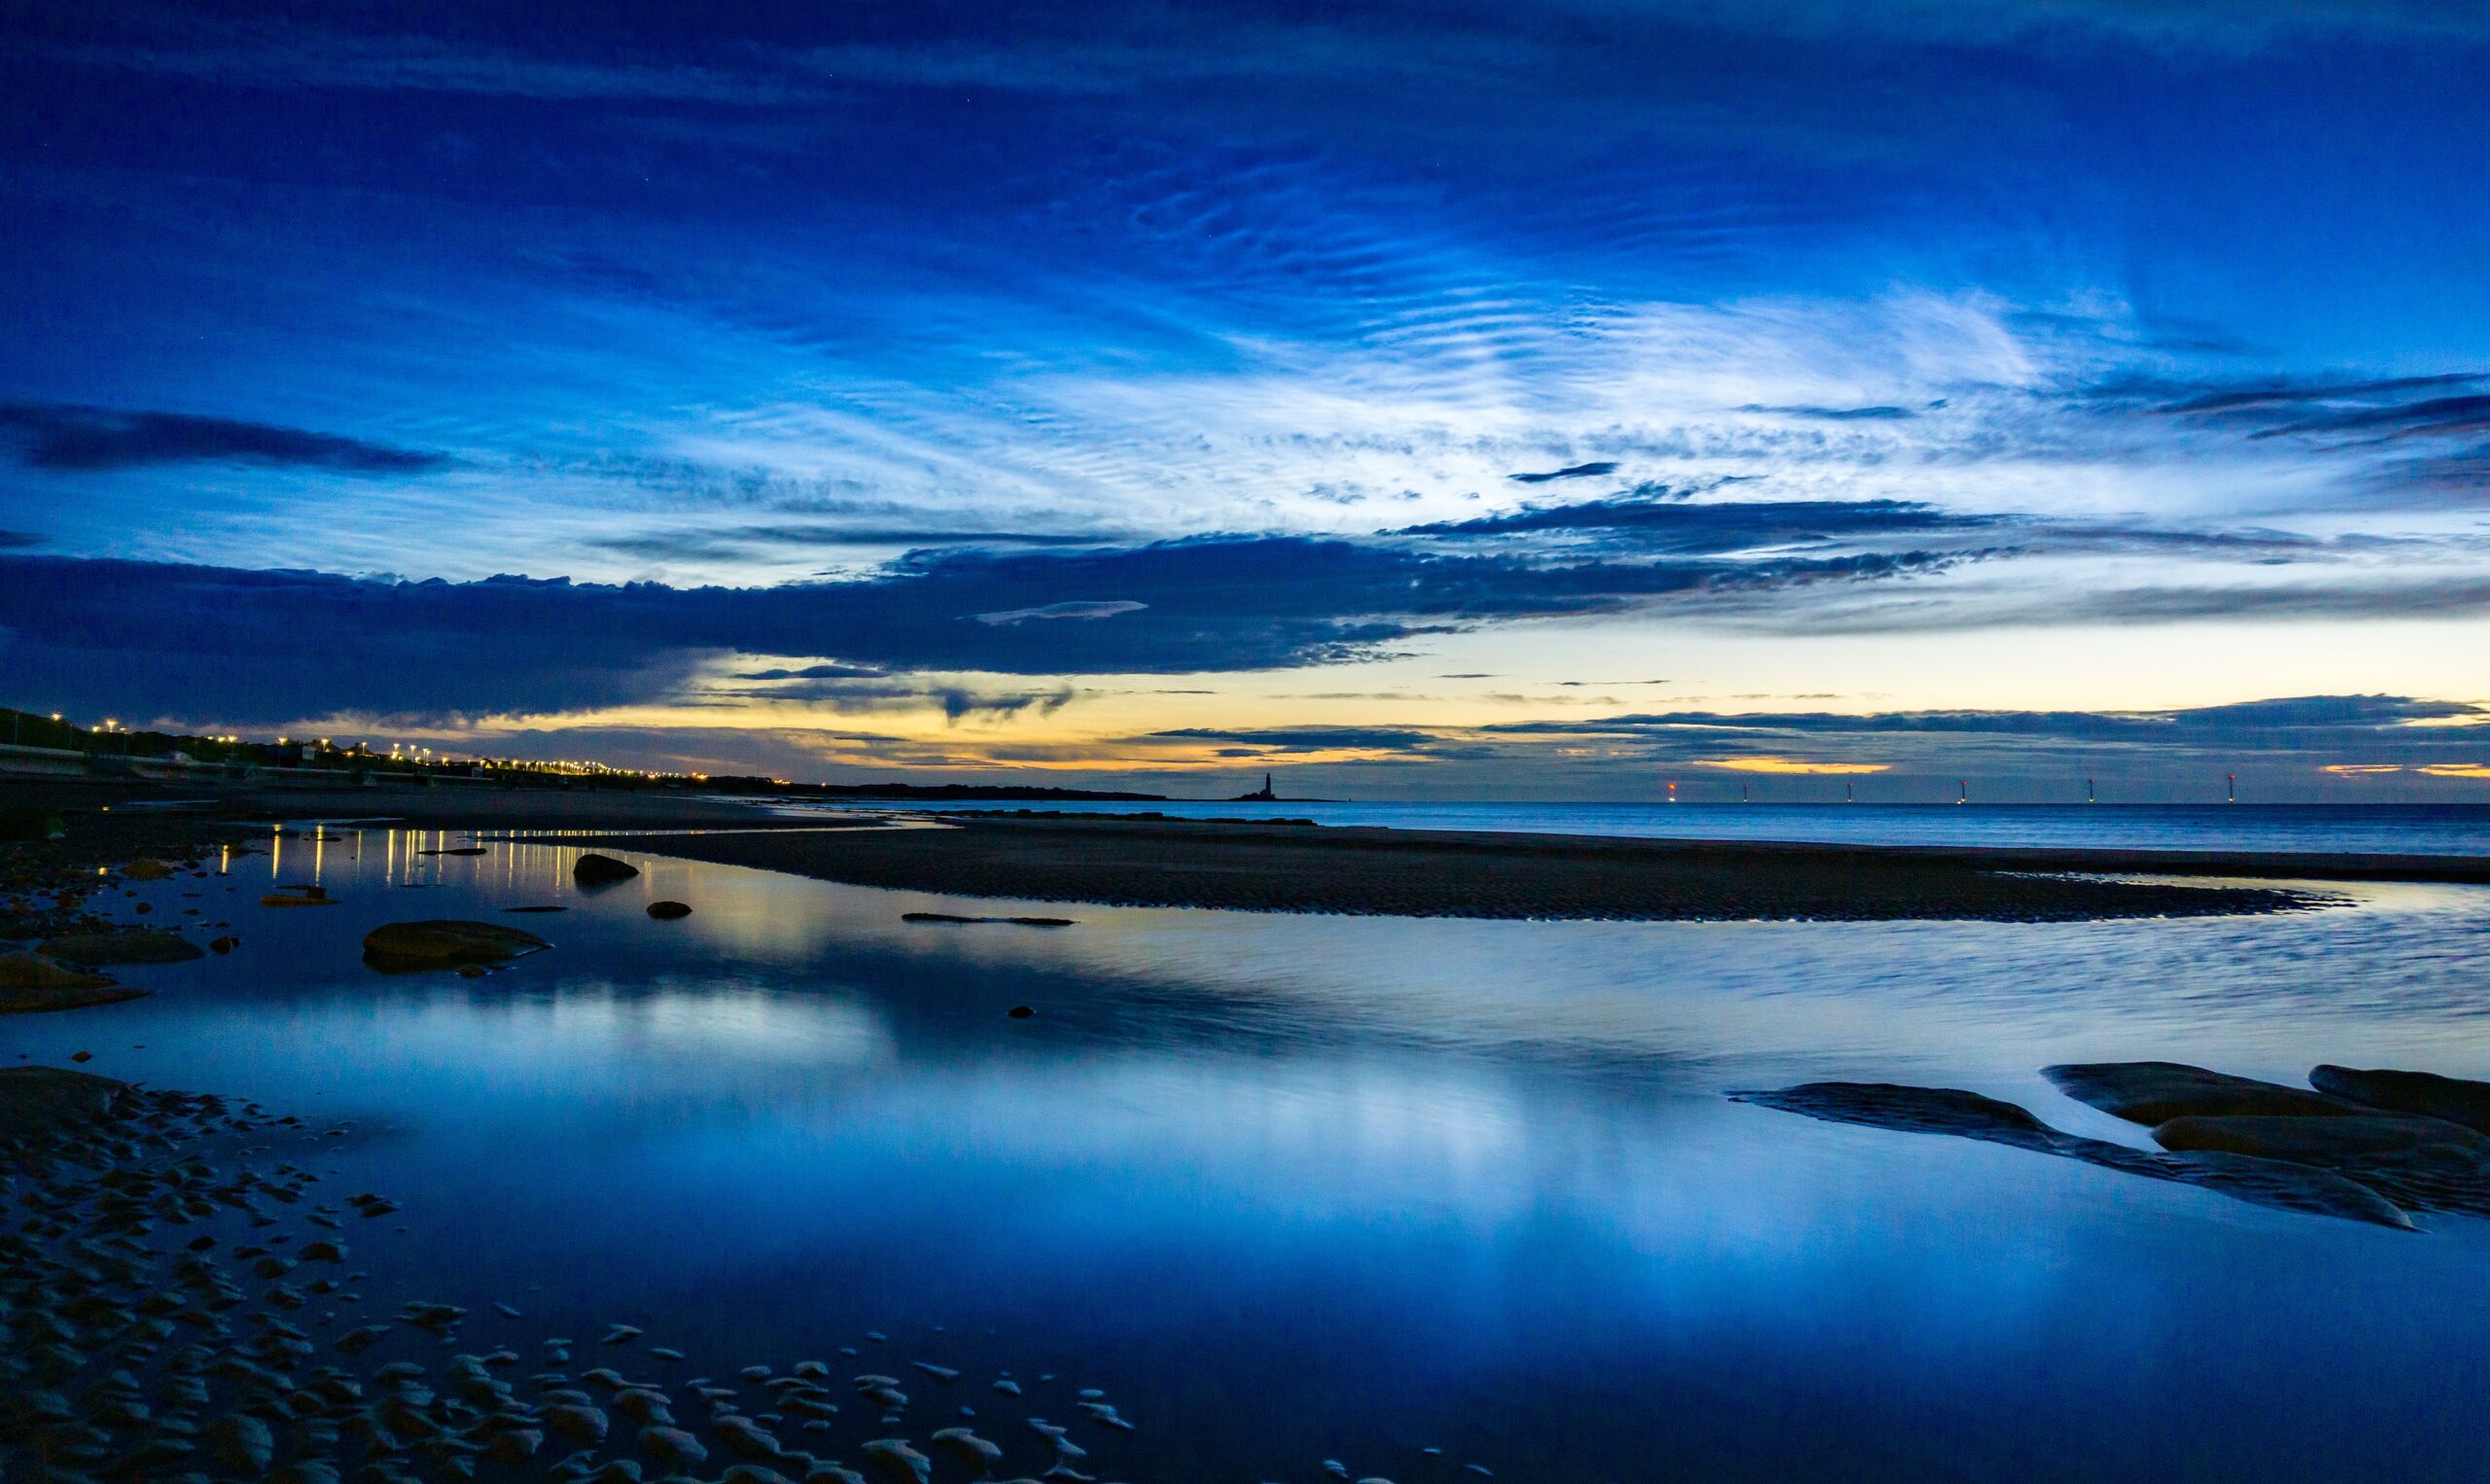 Wide generic image of sands in the evening, with water still sitting, iridescent blue looking out to see and the sky.